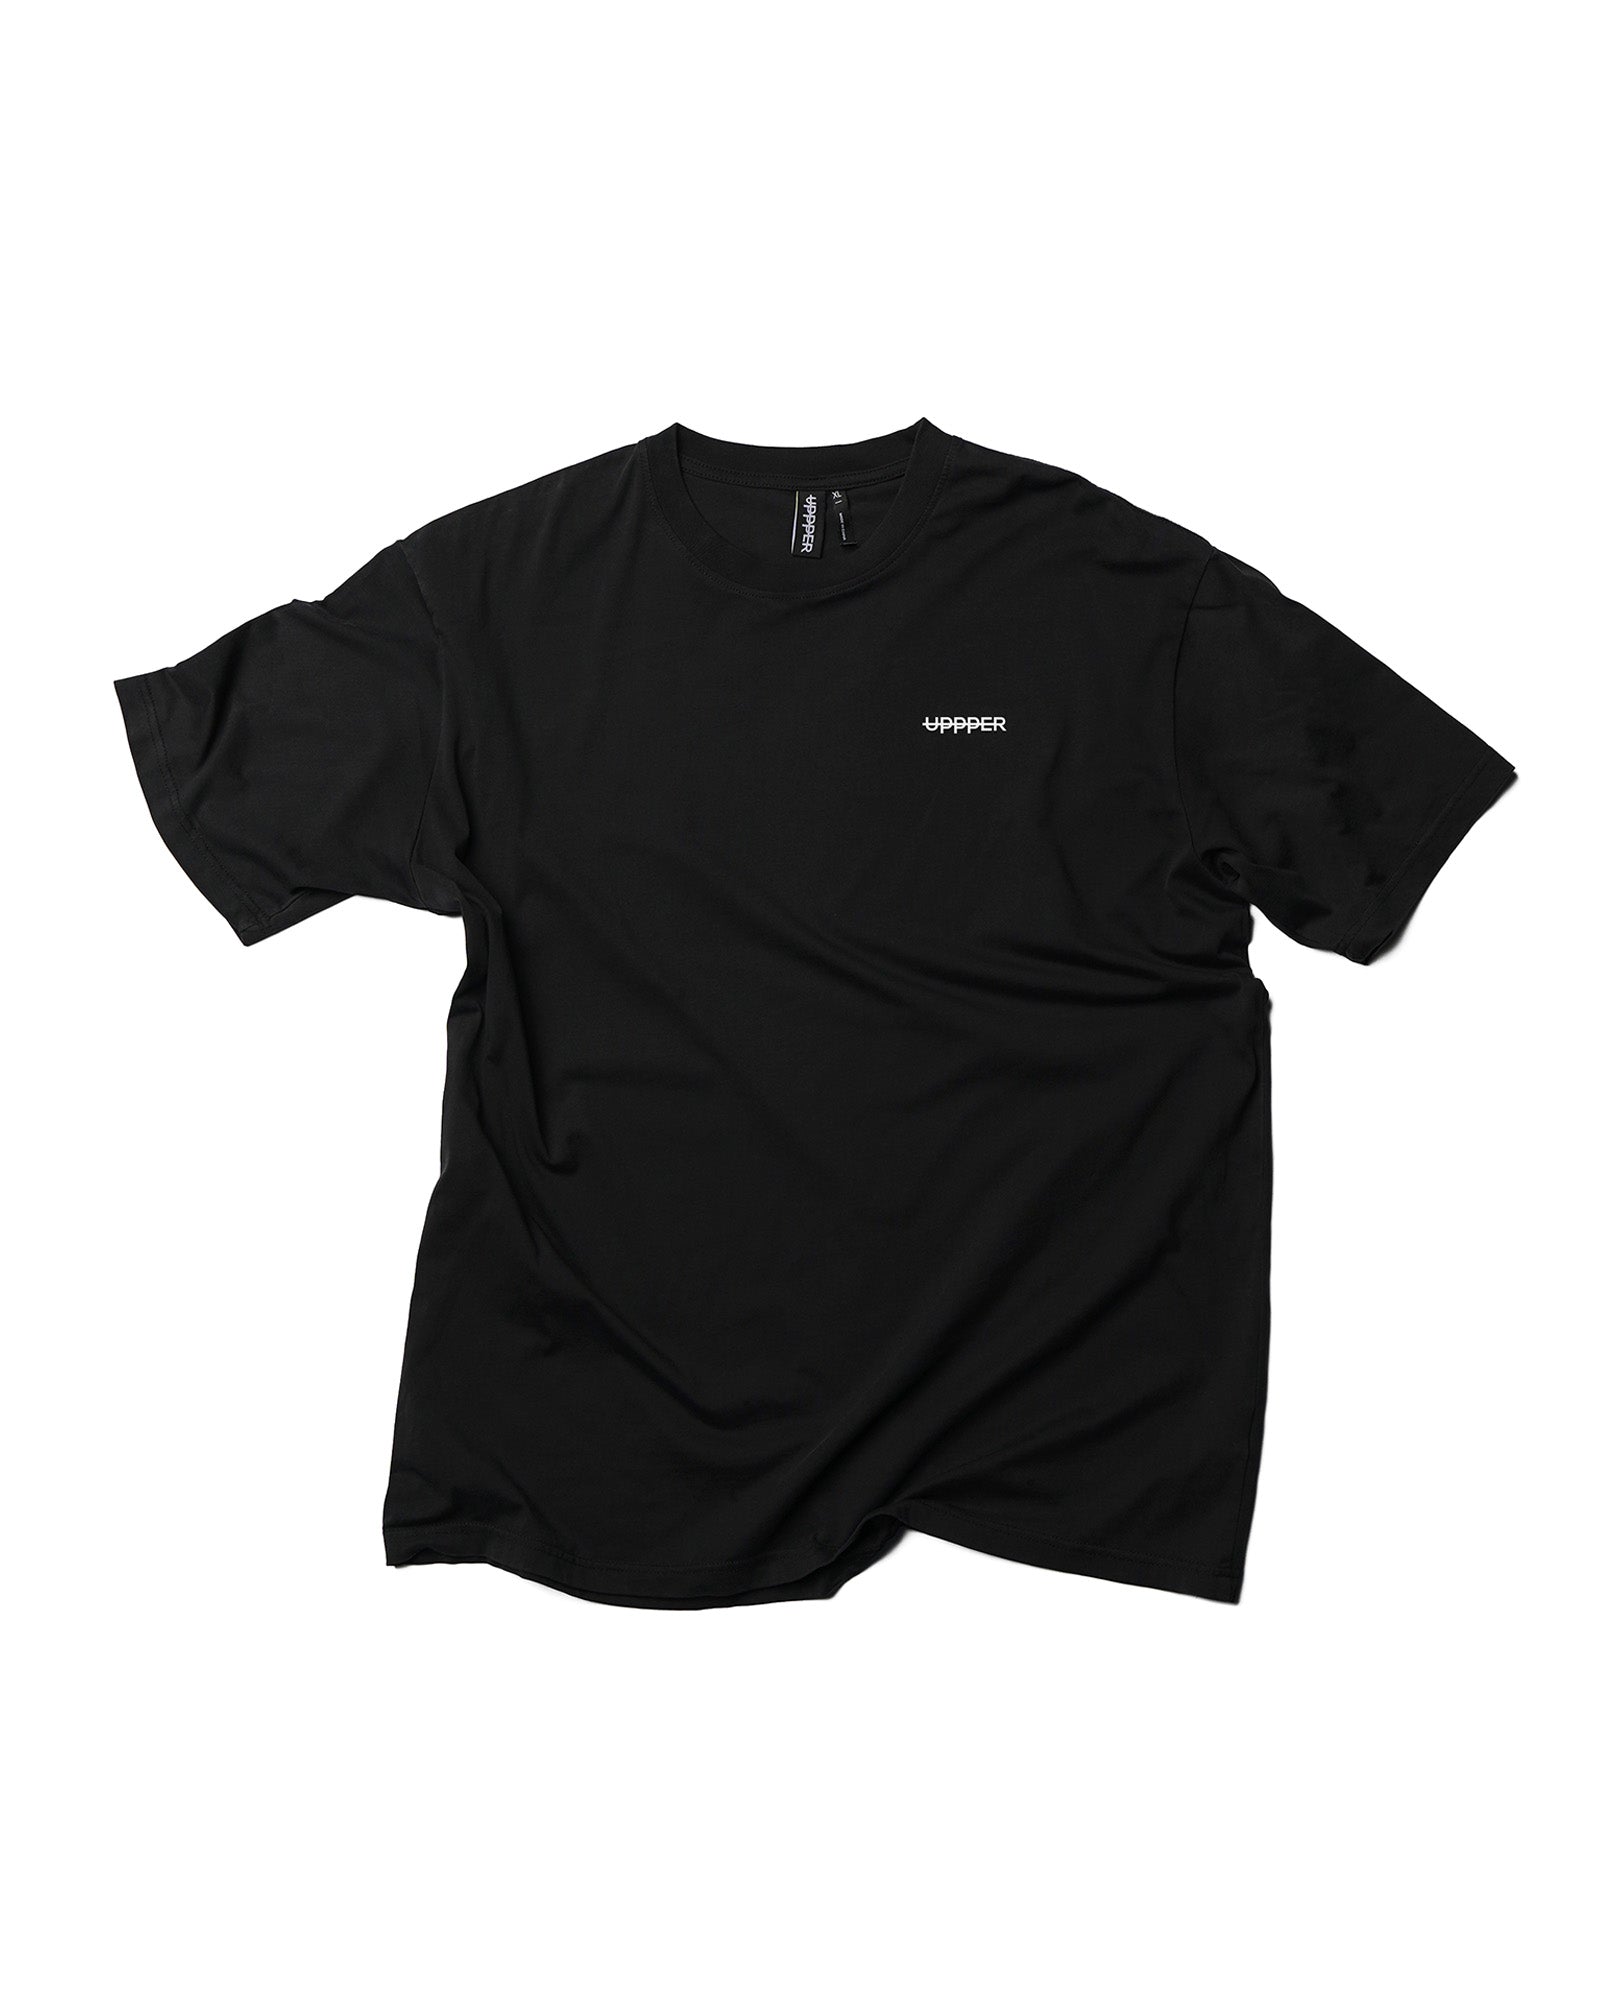 uppper t-shirt wsy black (front)